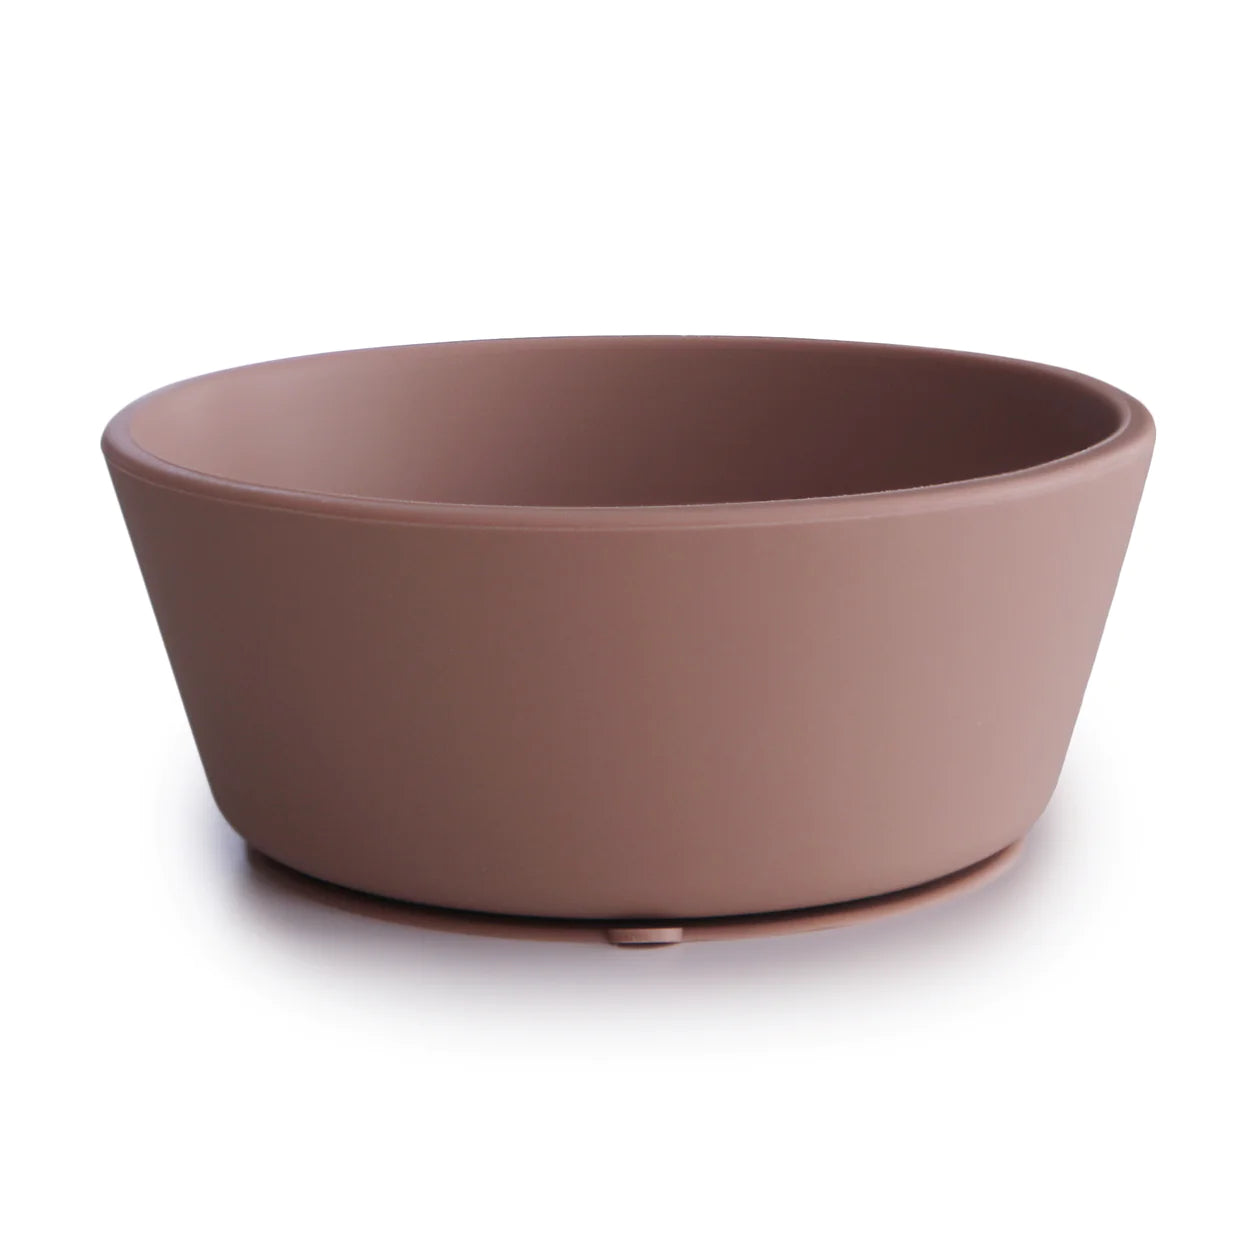 silicone suction bowl/ cloudy mauve